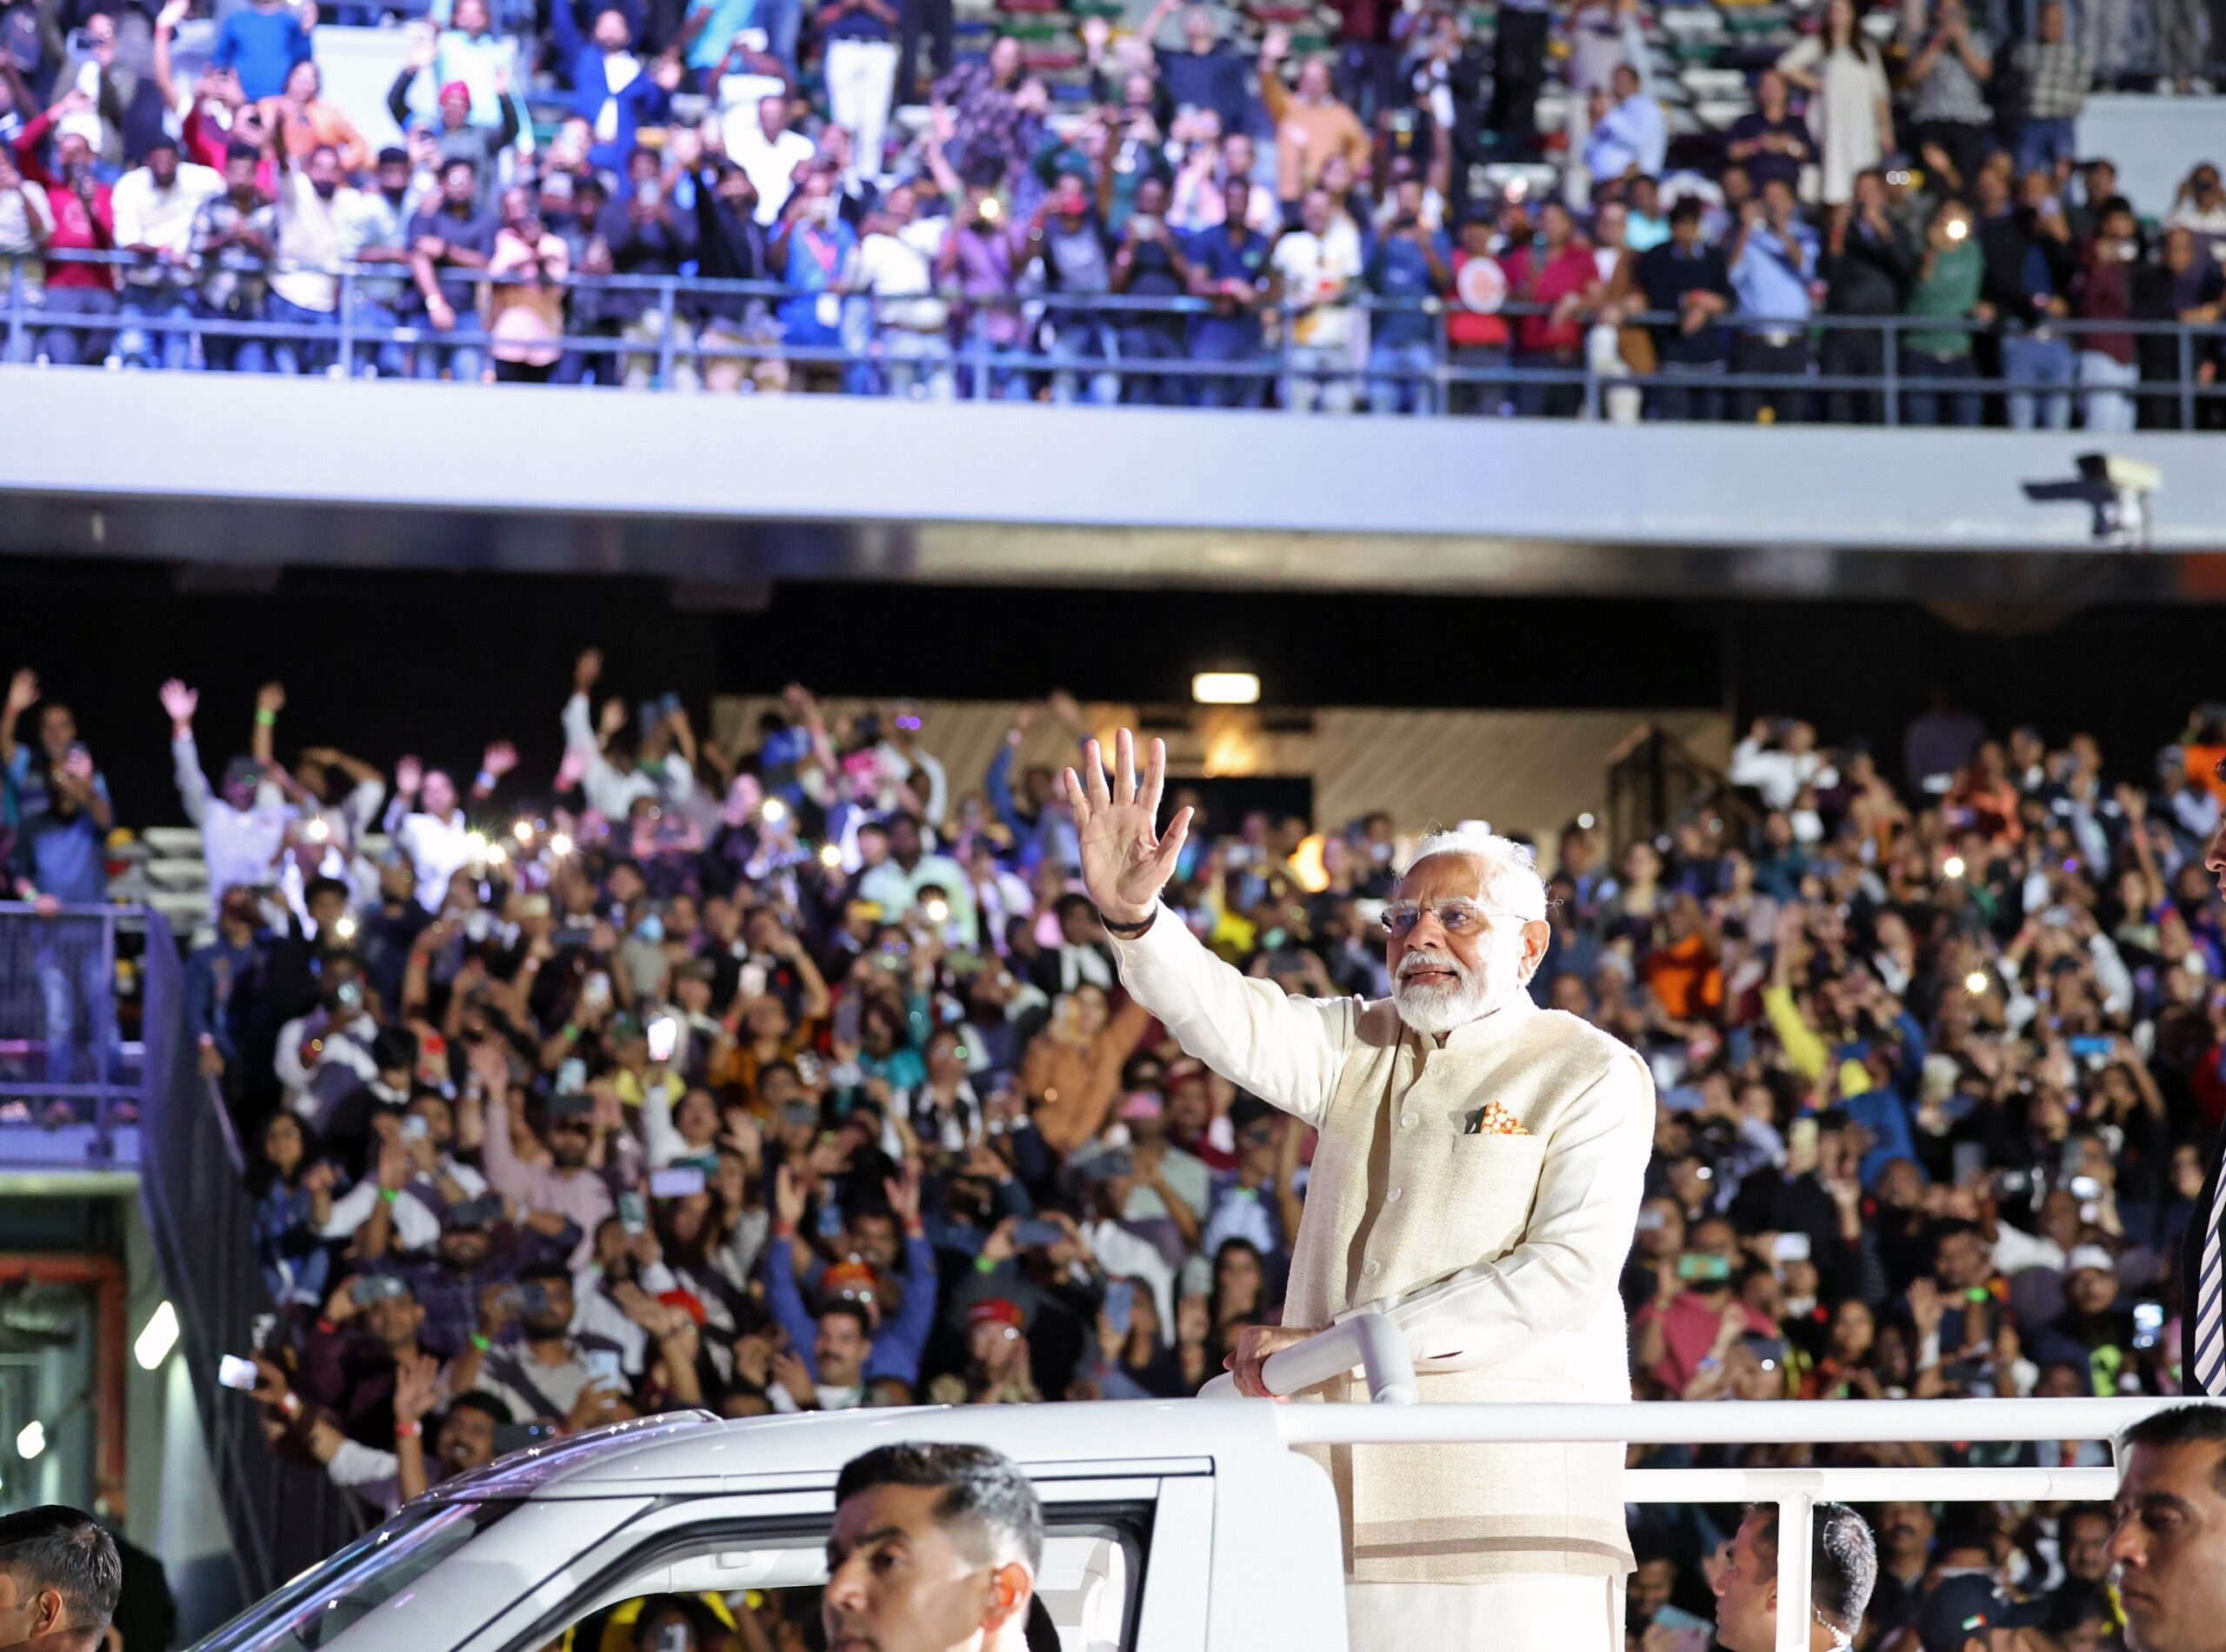 India's PM Narendra Modi waves at supporters gathered at Zayed Sports Stadium in Abu Dhabi on Tuesday